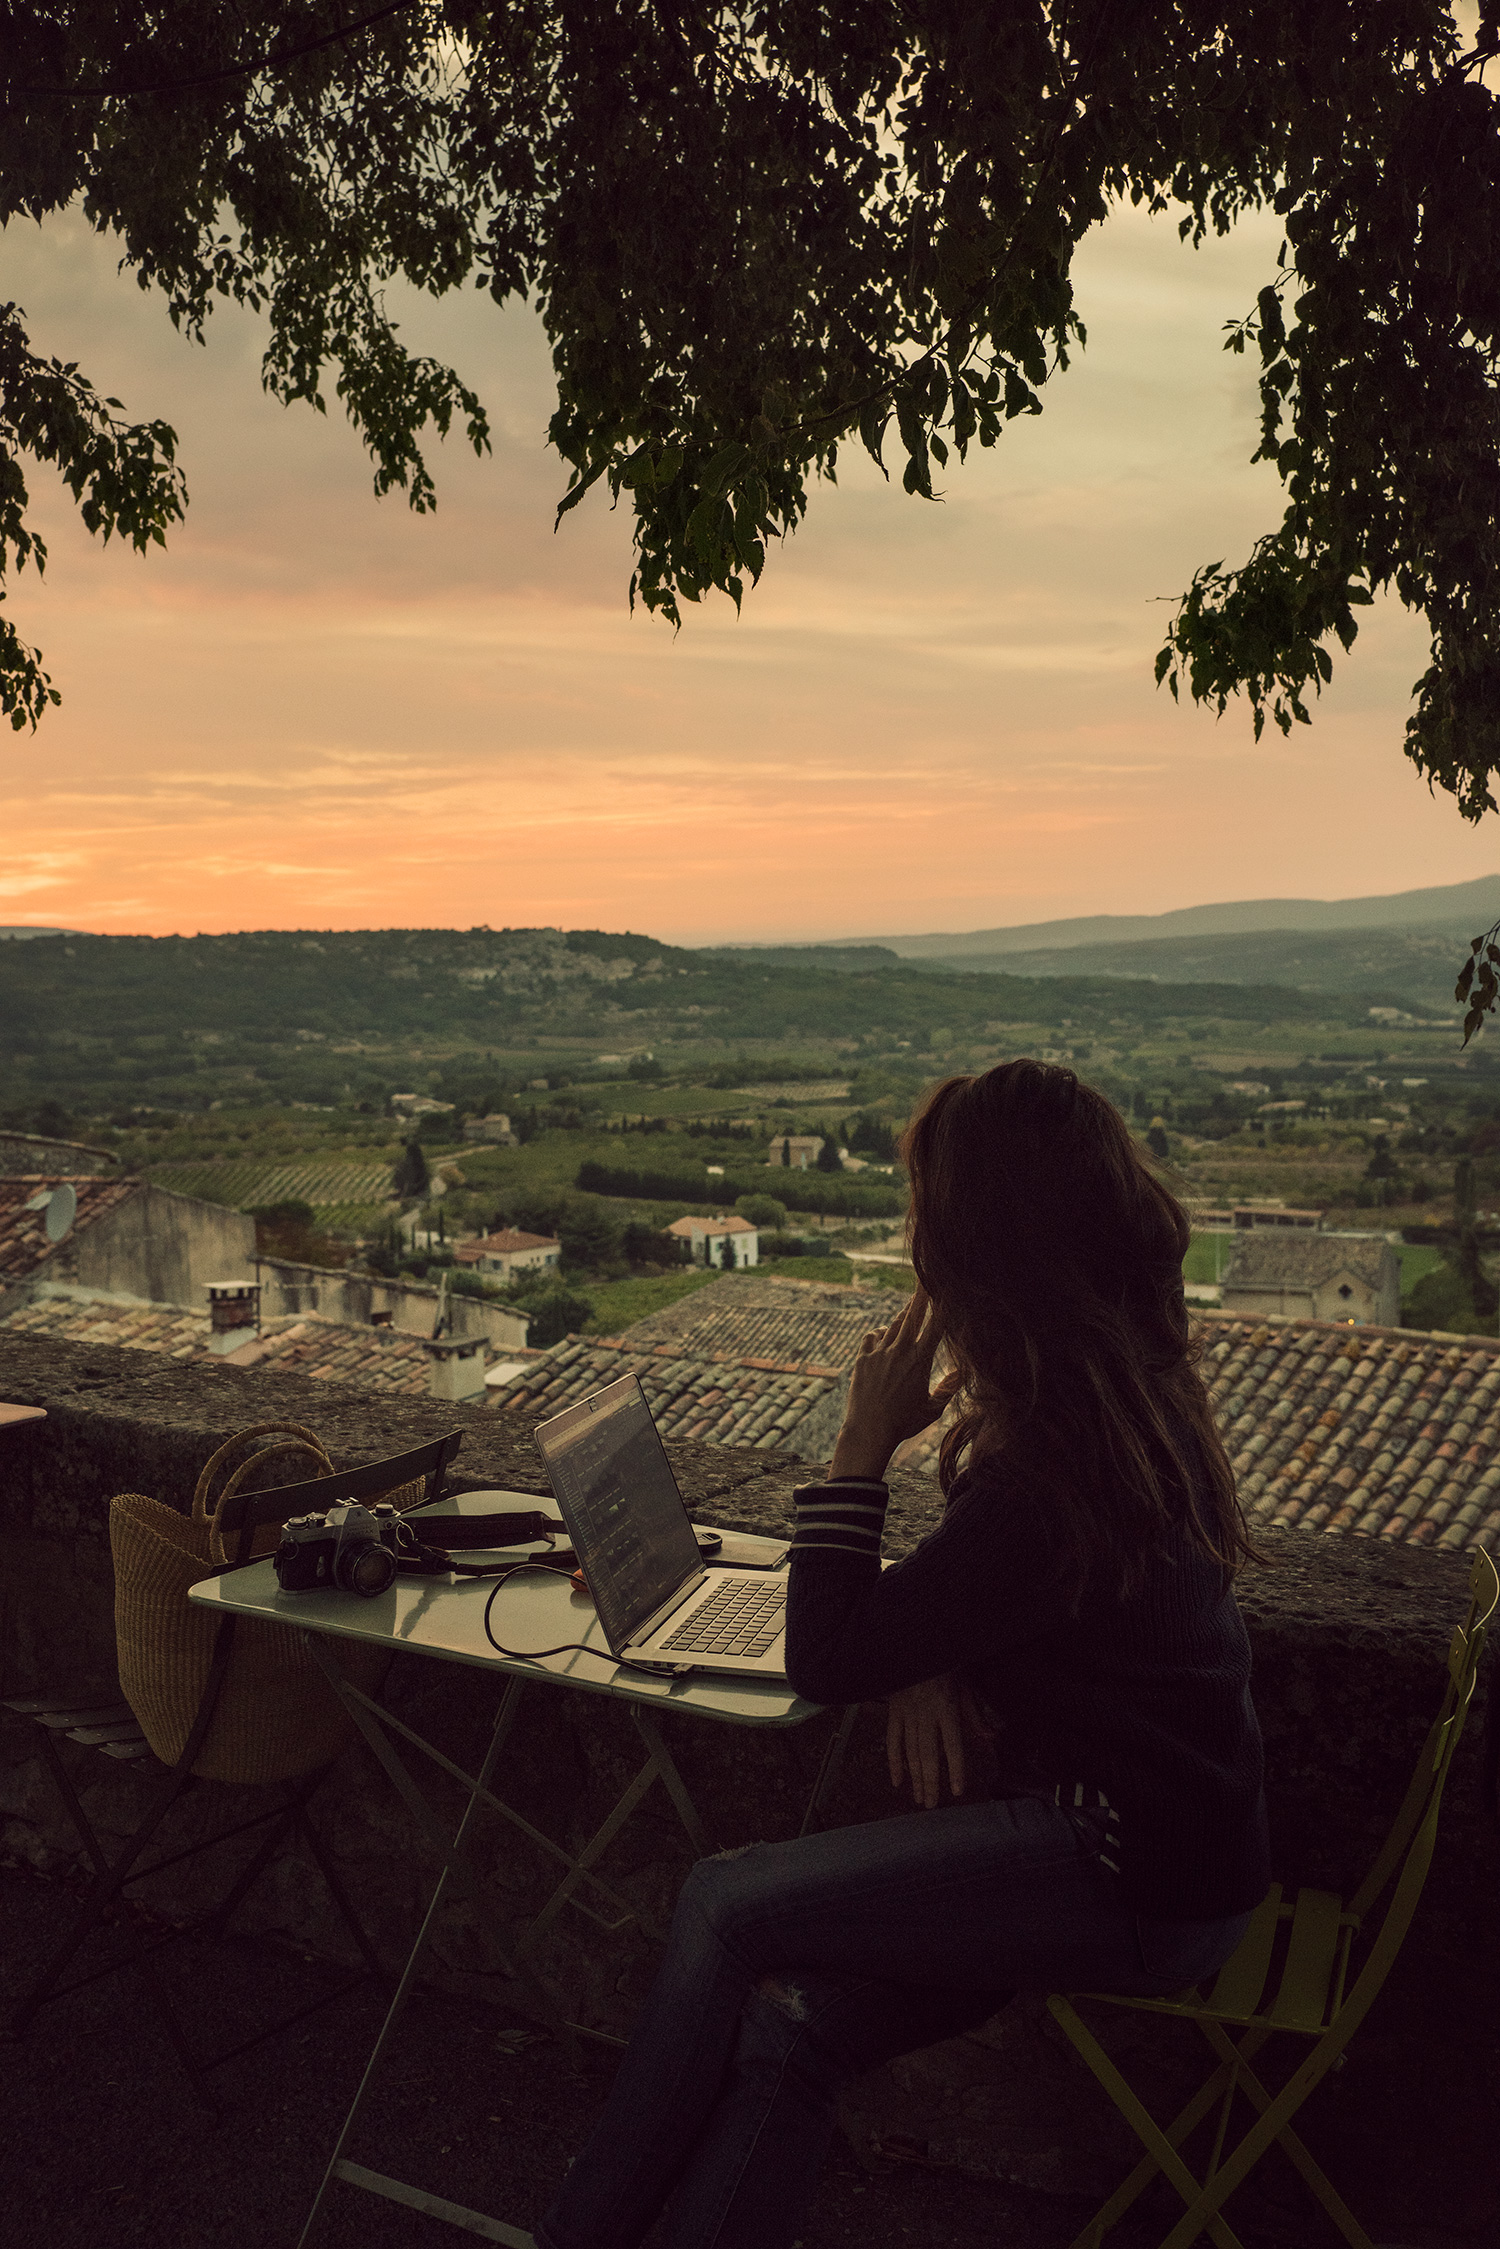 Sunset vista from the small Provencal town of Bonnieux, France